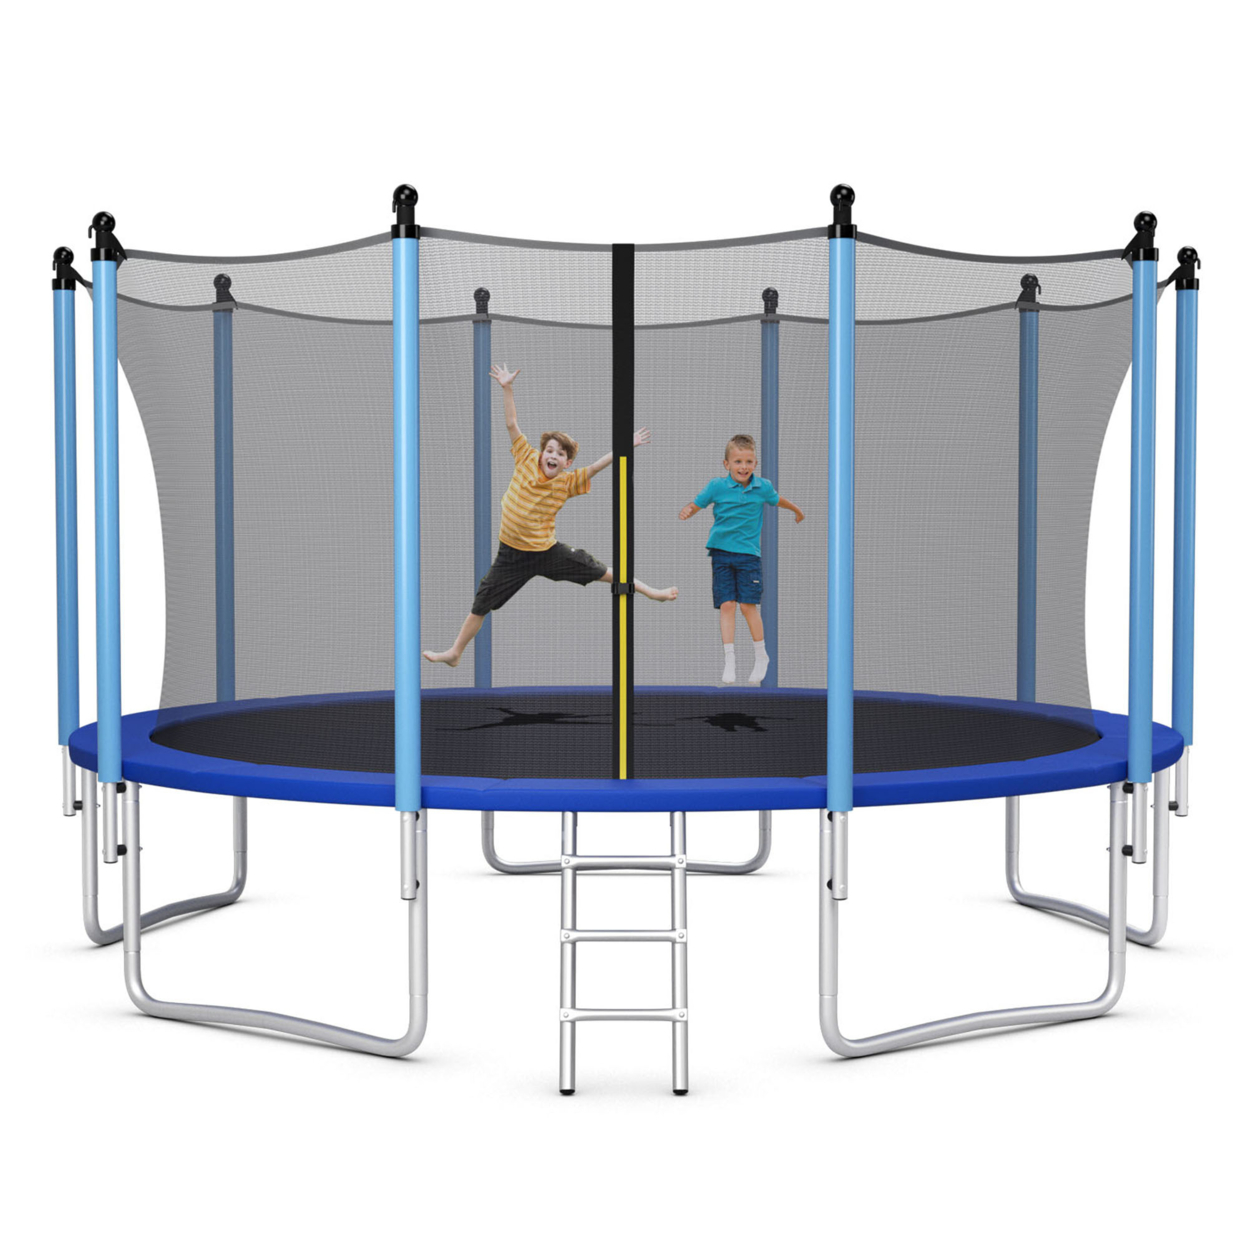 8/10/12/14/15/16FT Jumping Exercise Recreational Bounce Trampoline For Kids W/Safety Enclosure - 14 Ft